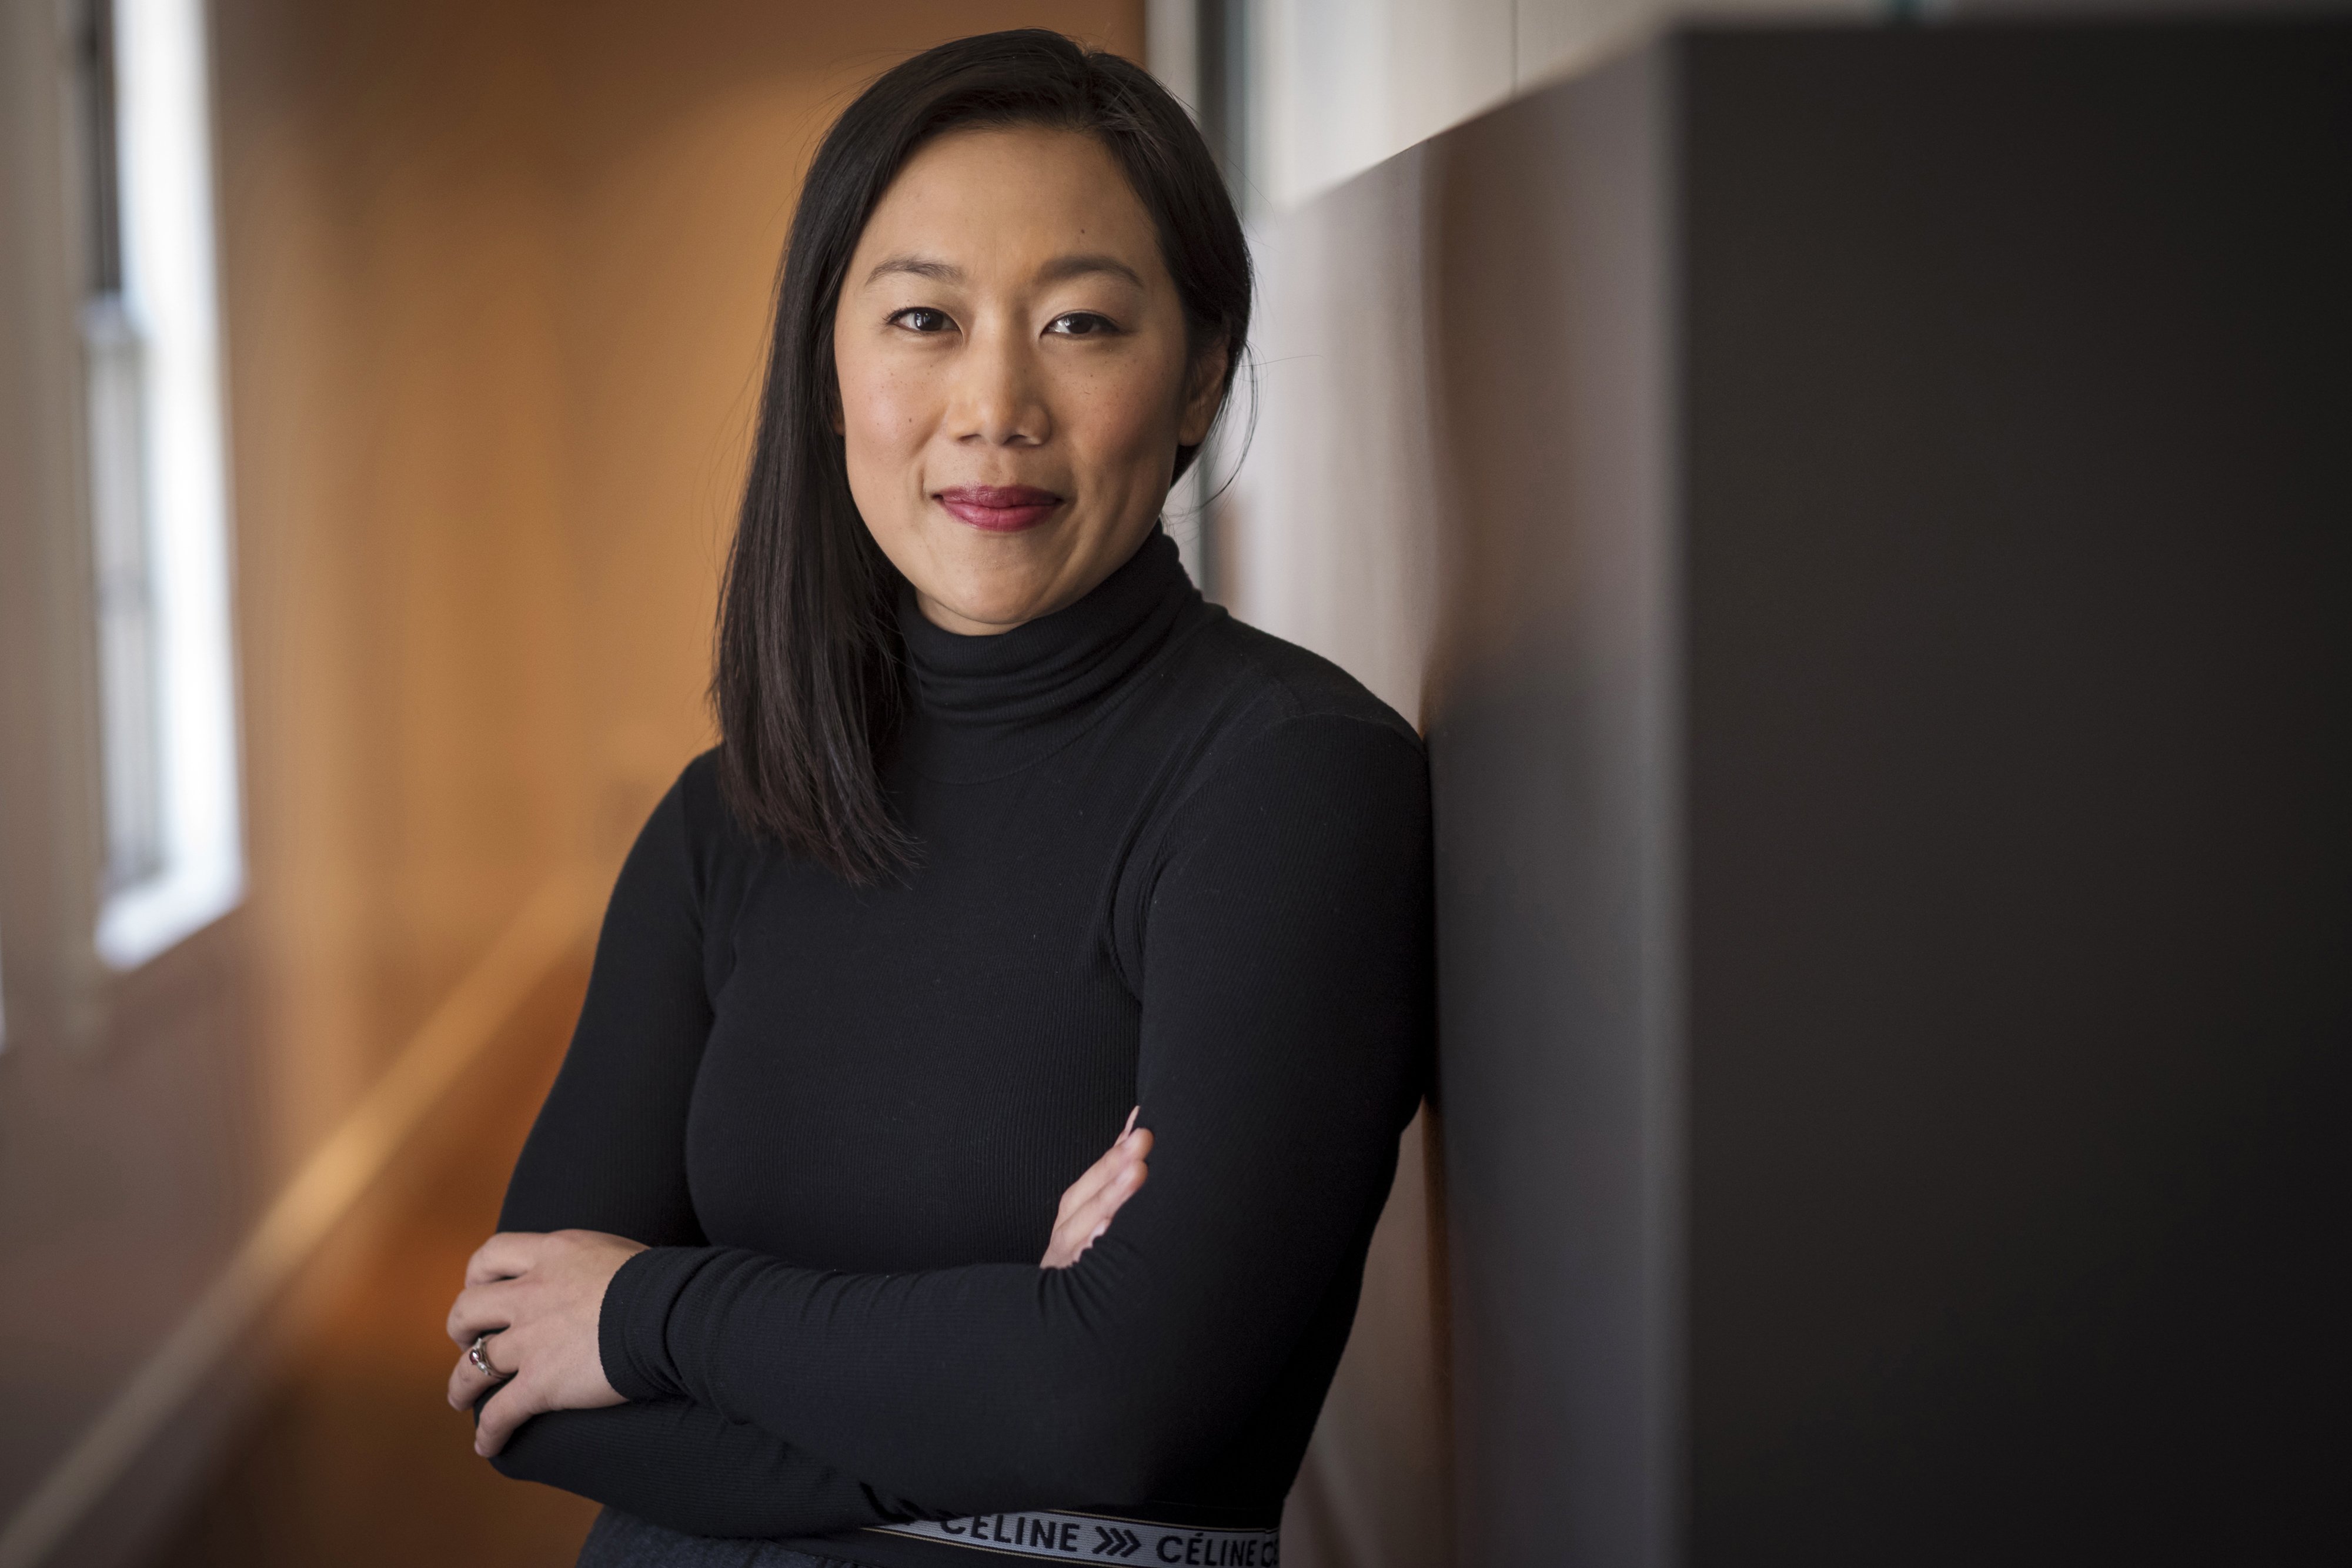 Priscilla Chan after a Bloomberg Technology television interview in San Francisco, California, U.S., on Thursday, Jan. 24, 2019 | Photo: GettyImages